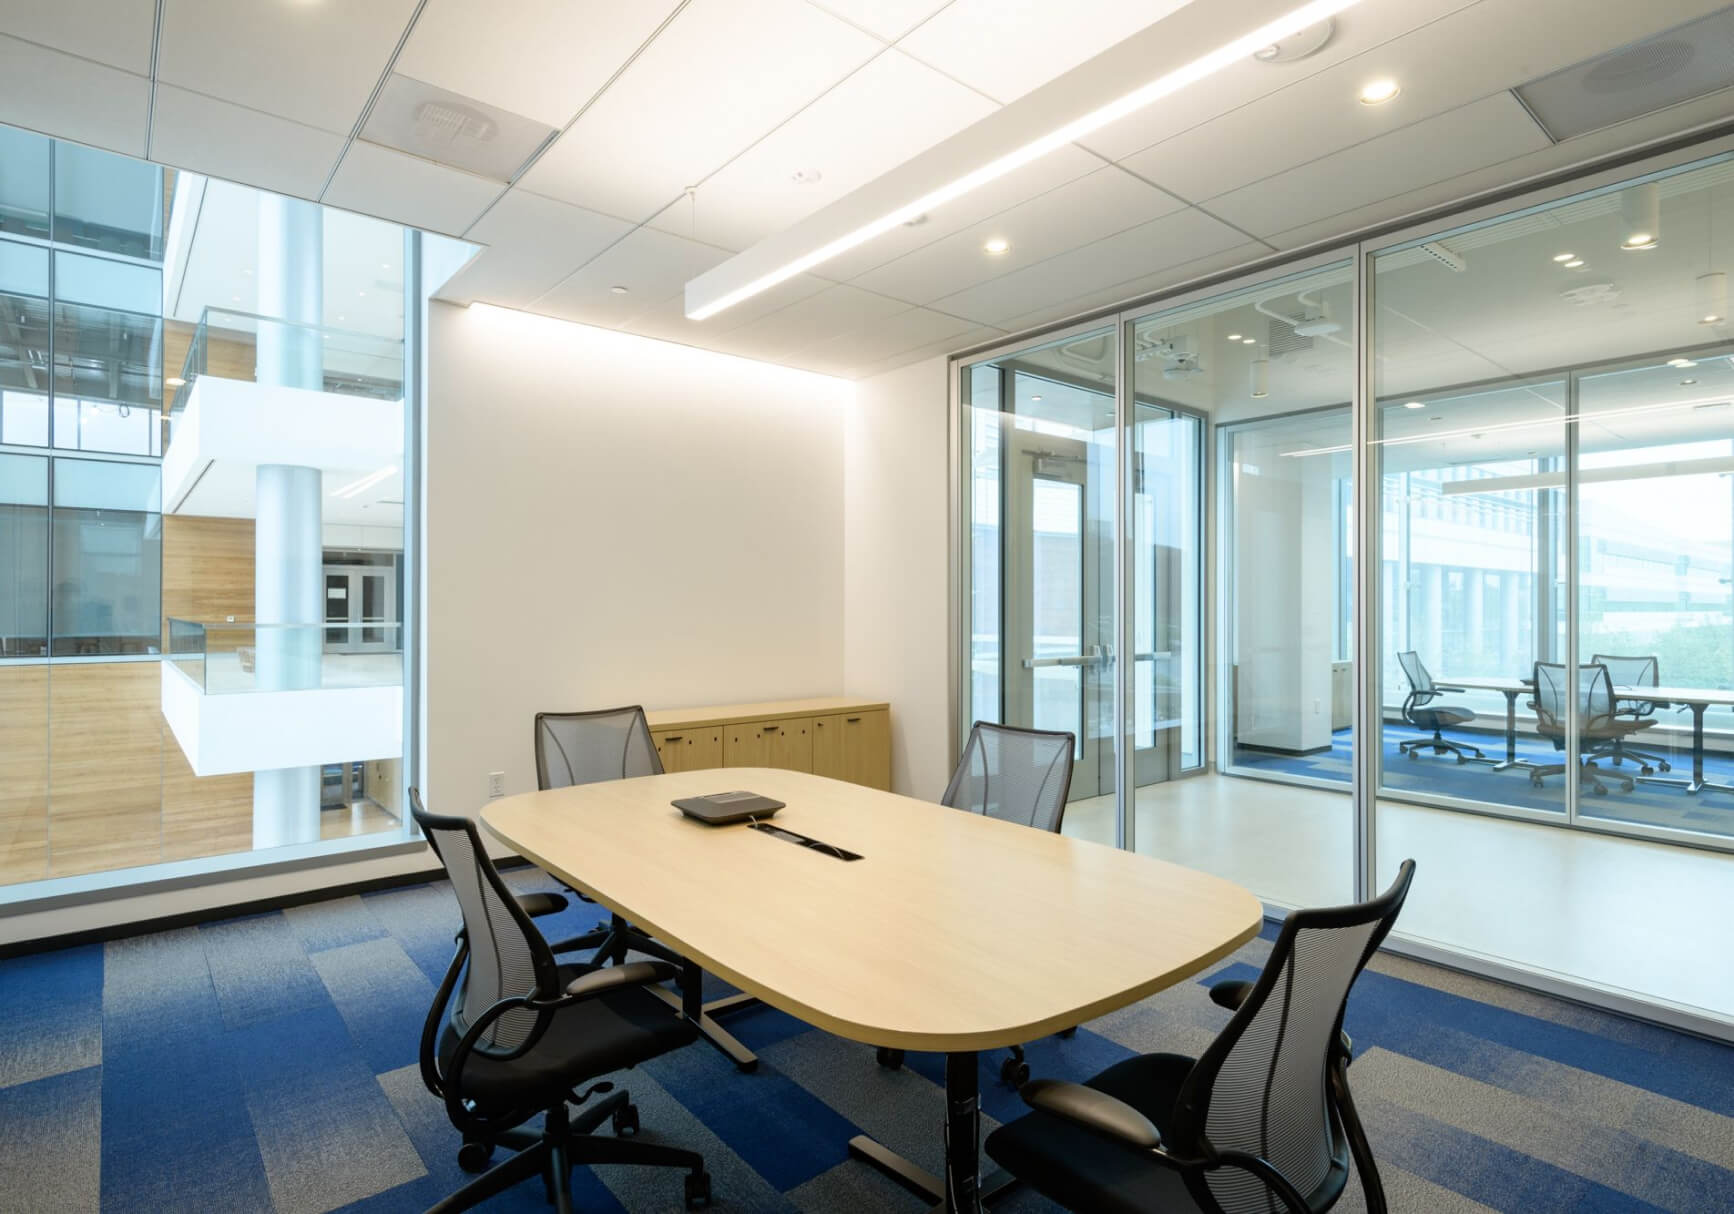 Collaboration spaces and break rooms